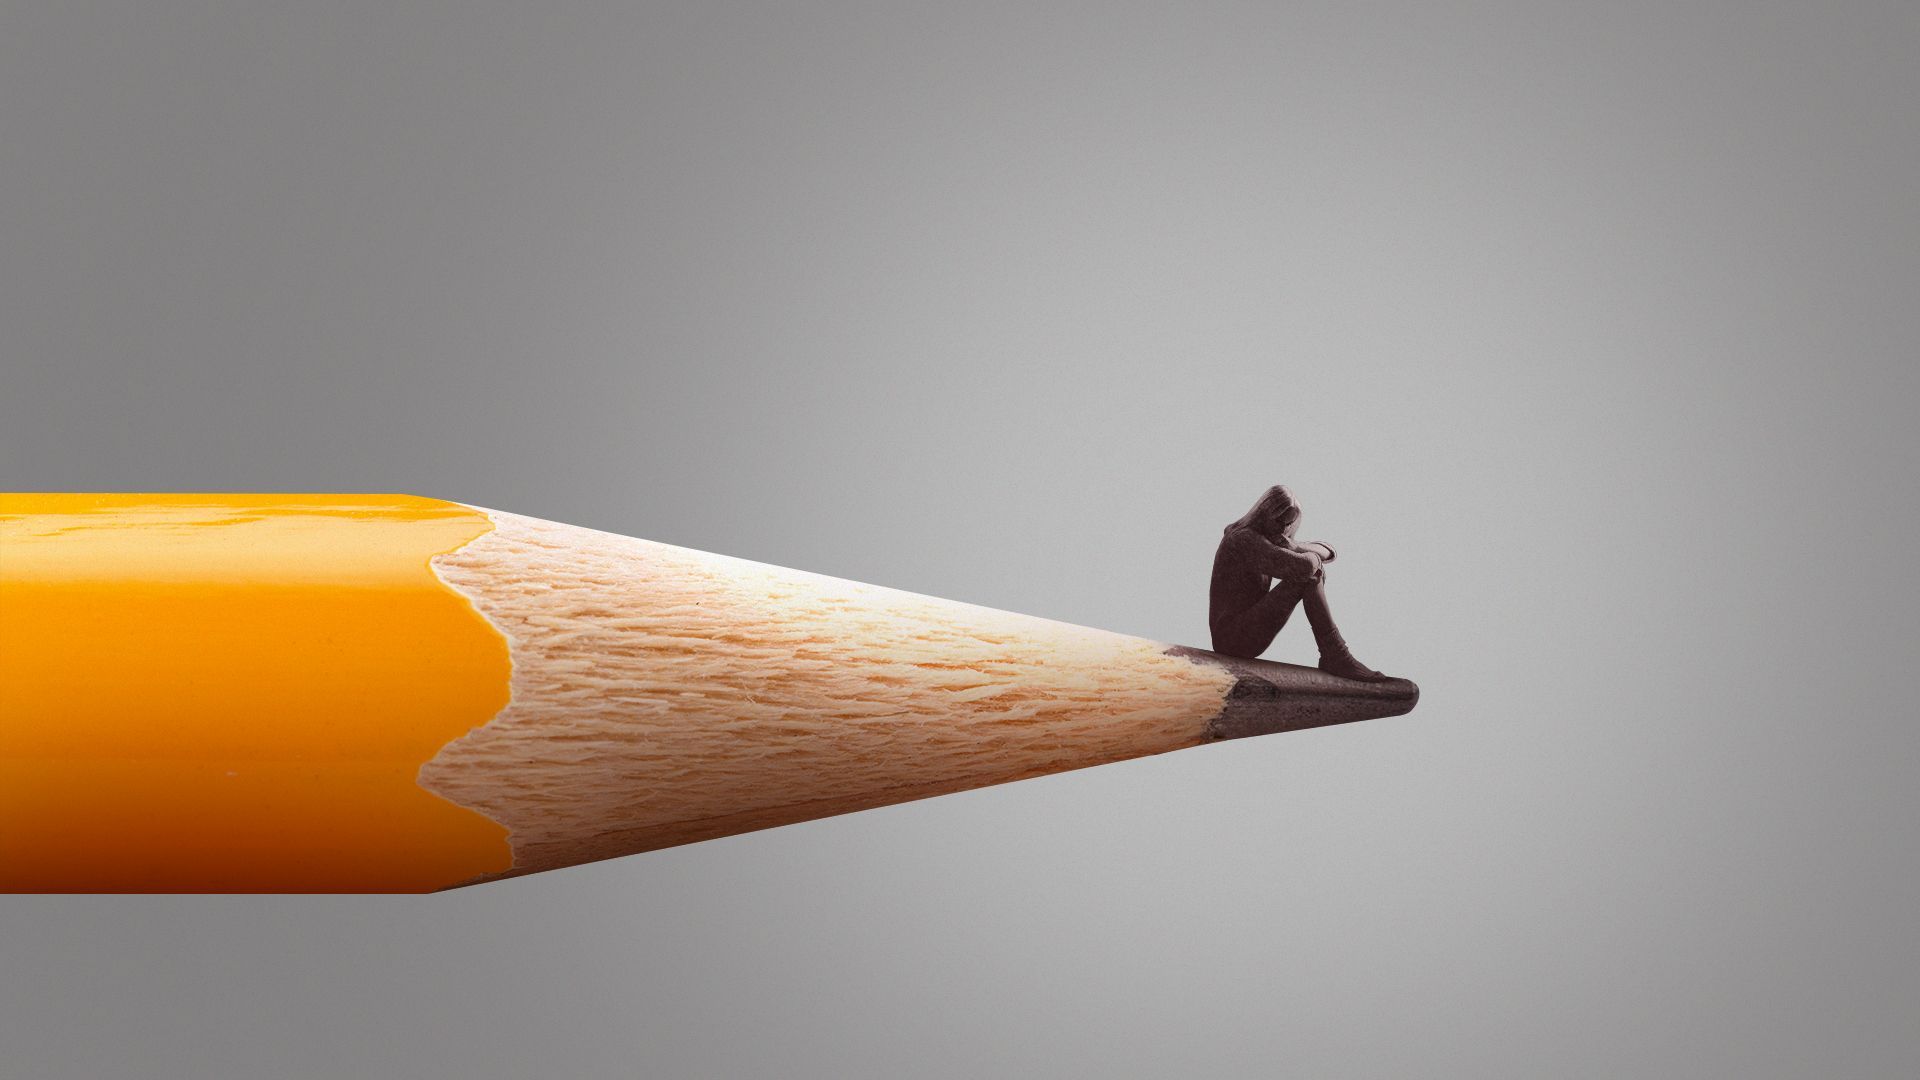 Illustration of a person sitting somberly on the edge of a giant pencil